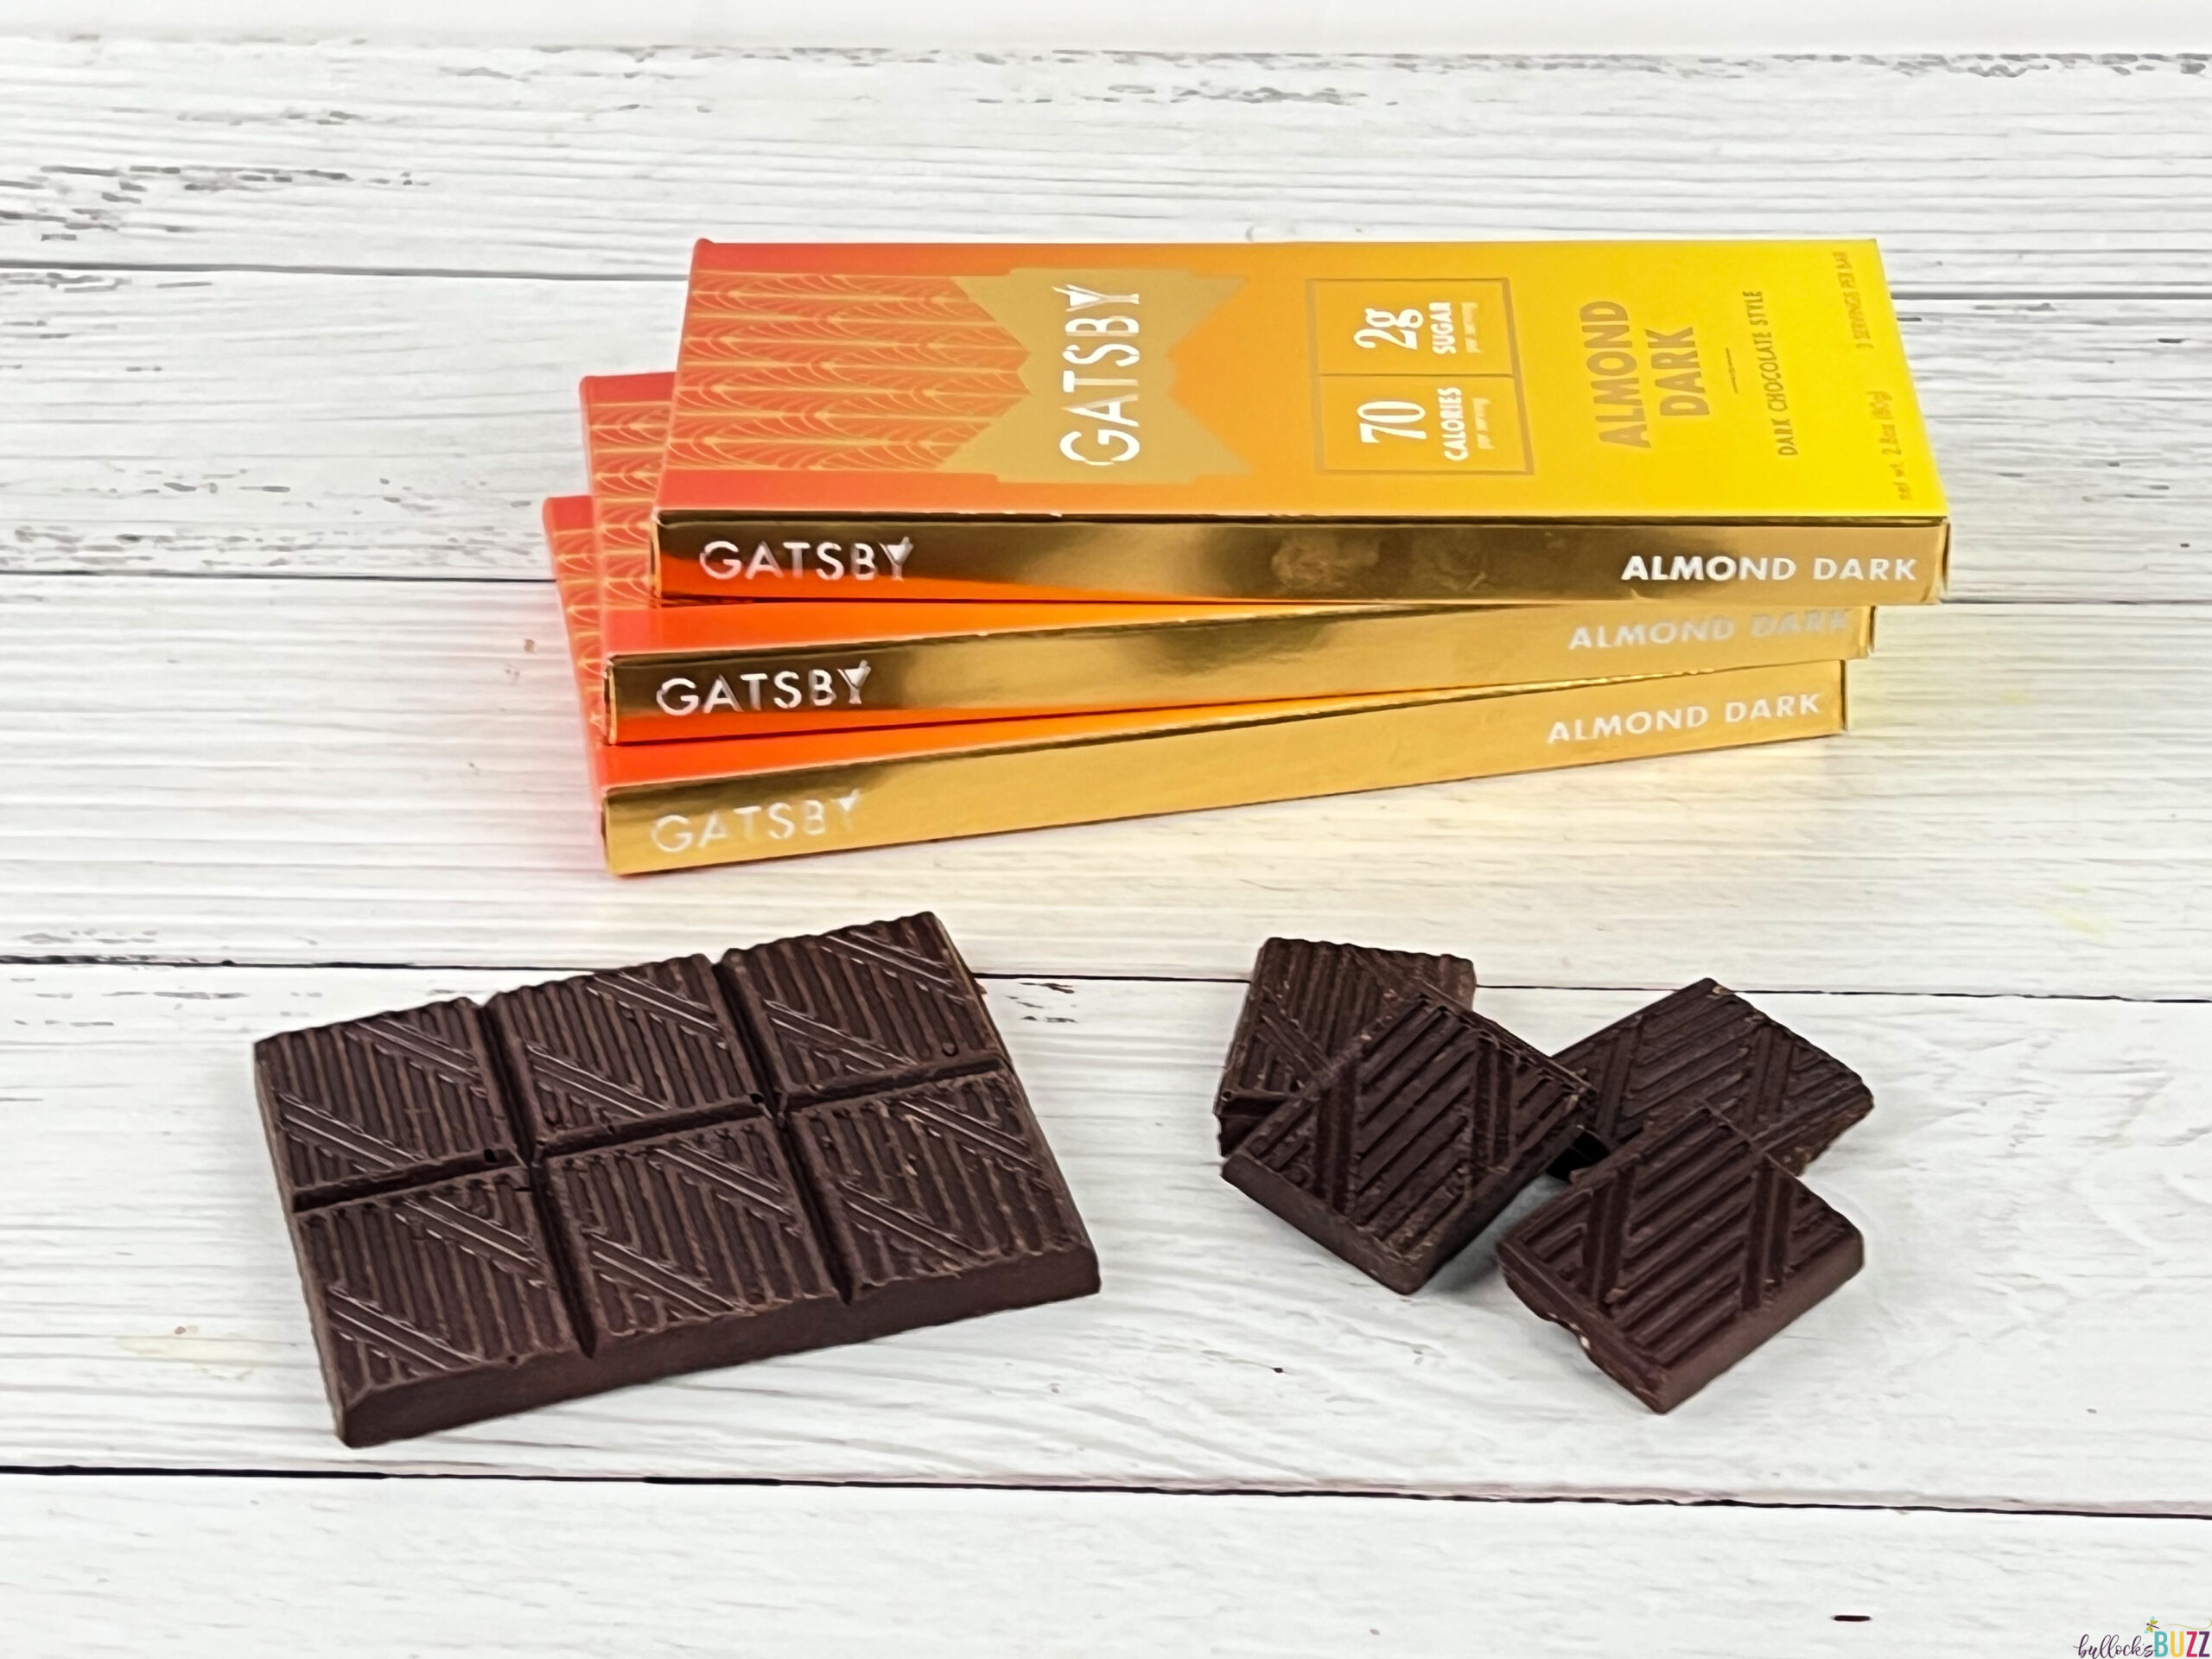 Gatsby Chocolate: Low-Cal, Low-Fat, Low-Sugar, Guilt-Free